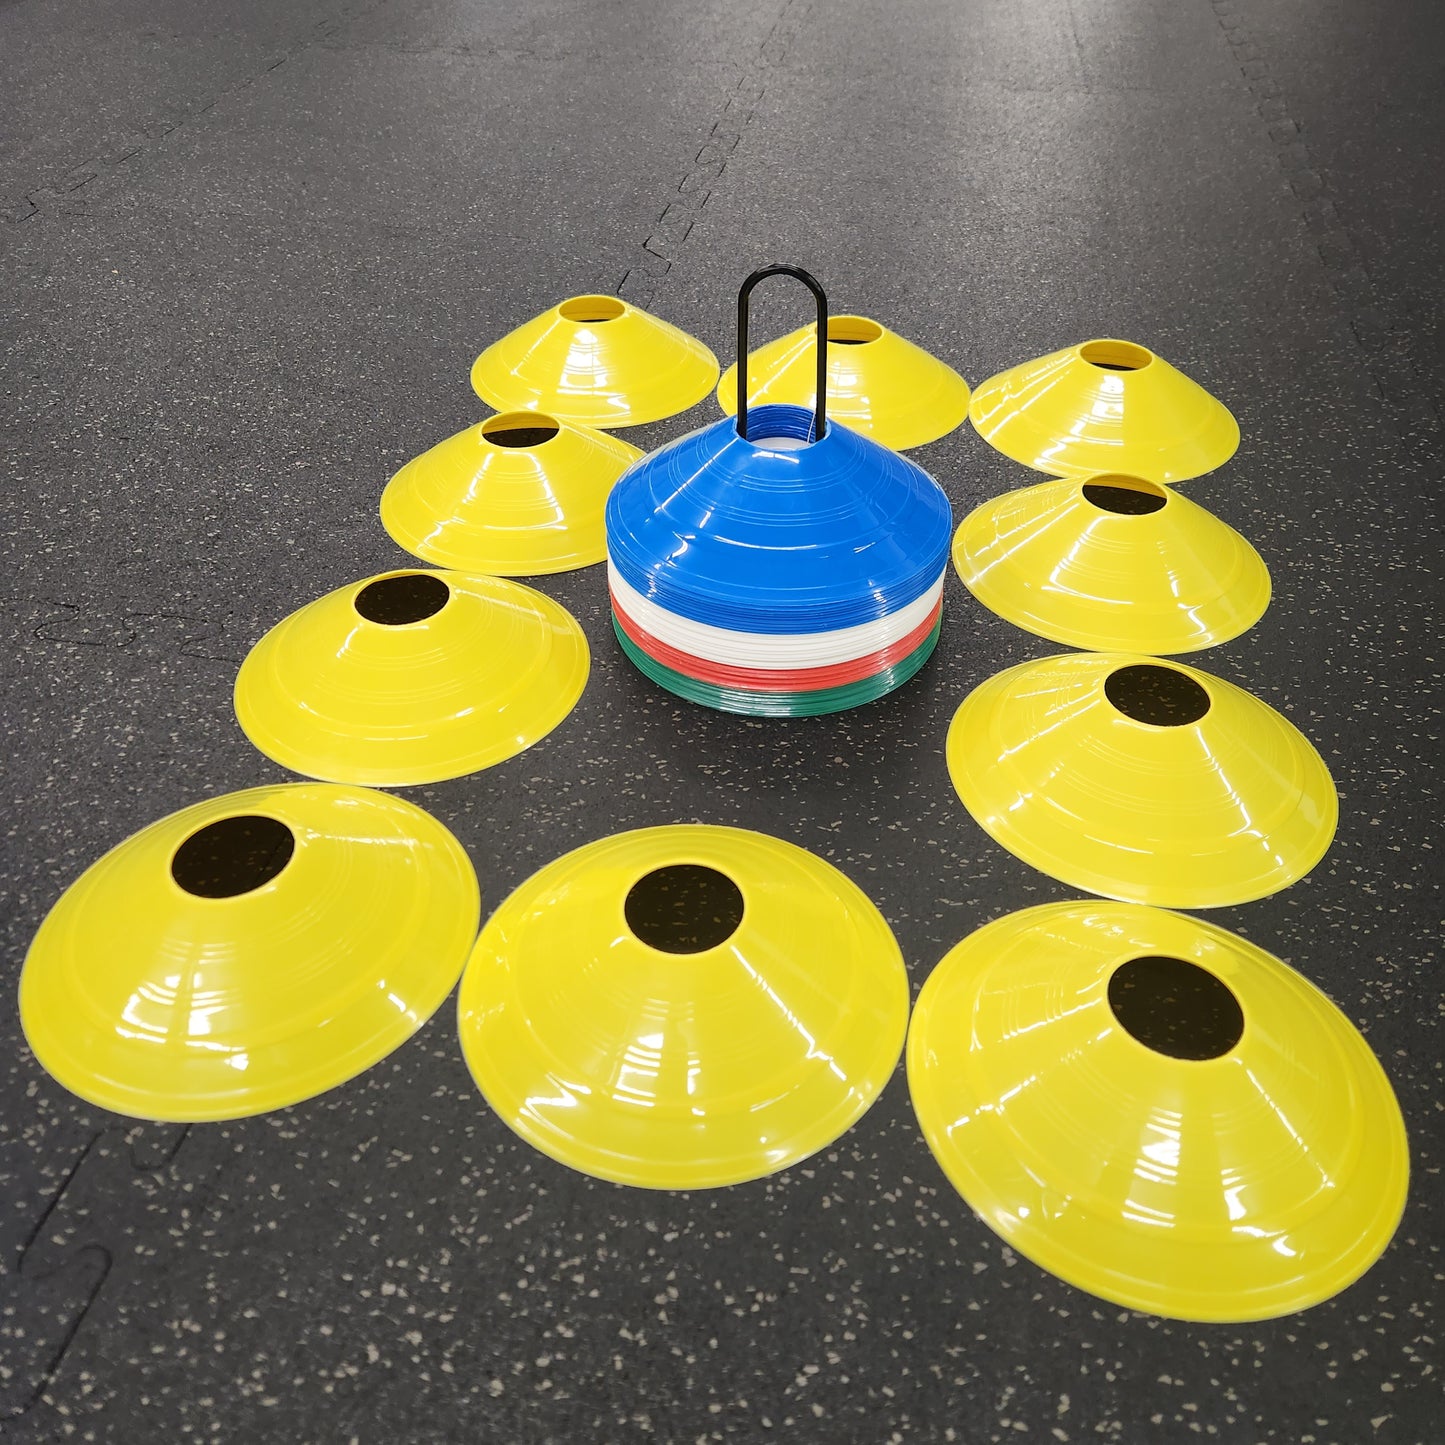 10 yellow agility cones encircling a black metal stand with agility cones on it.